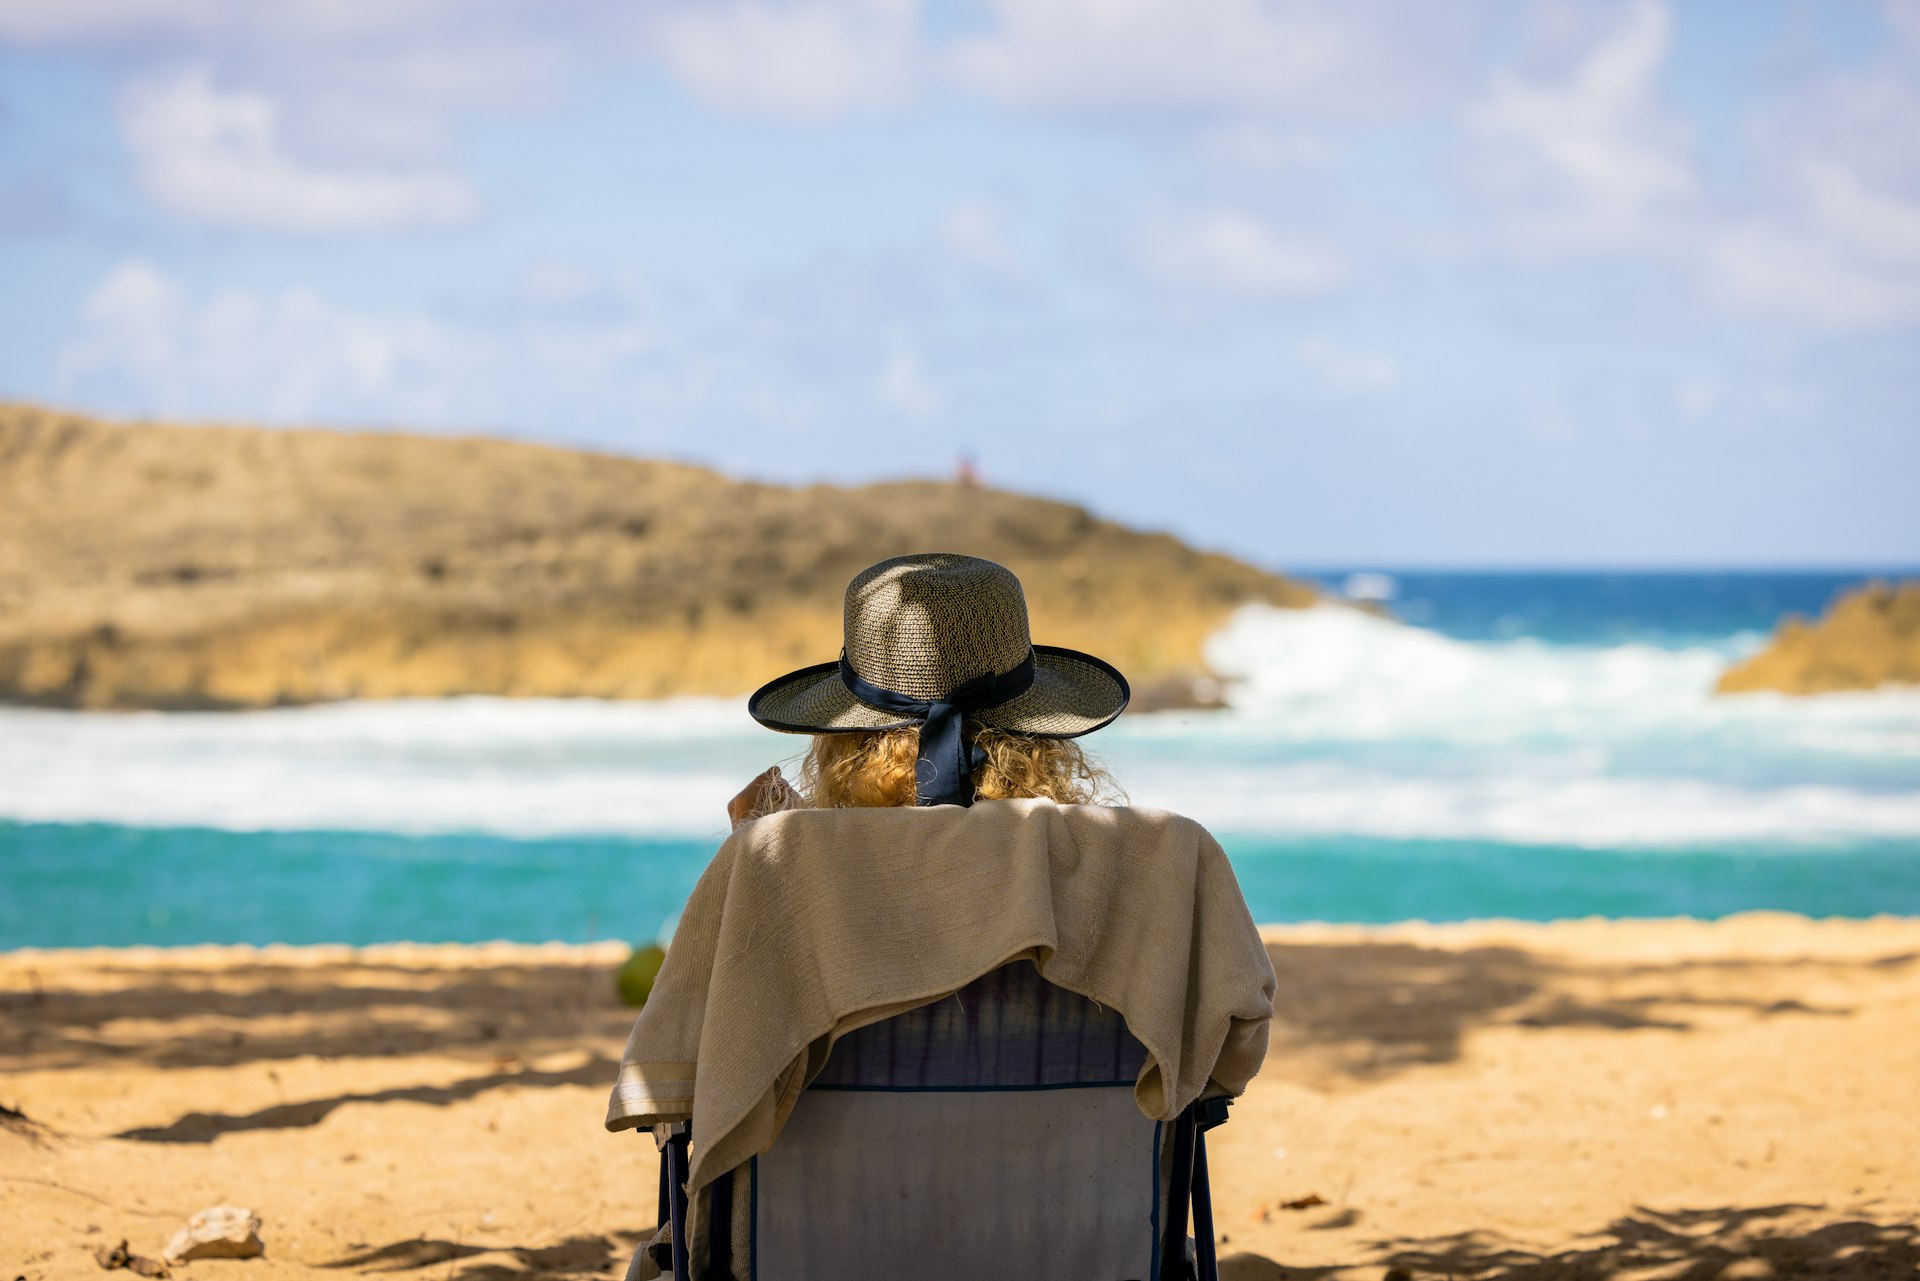 Back view of a woman sat in a chair on the beach, in the shade, with a sun hat on